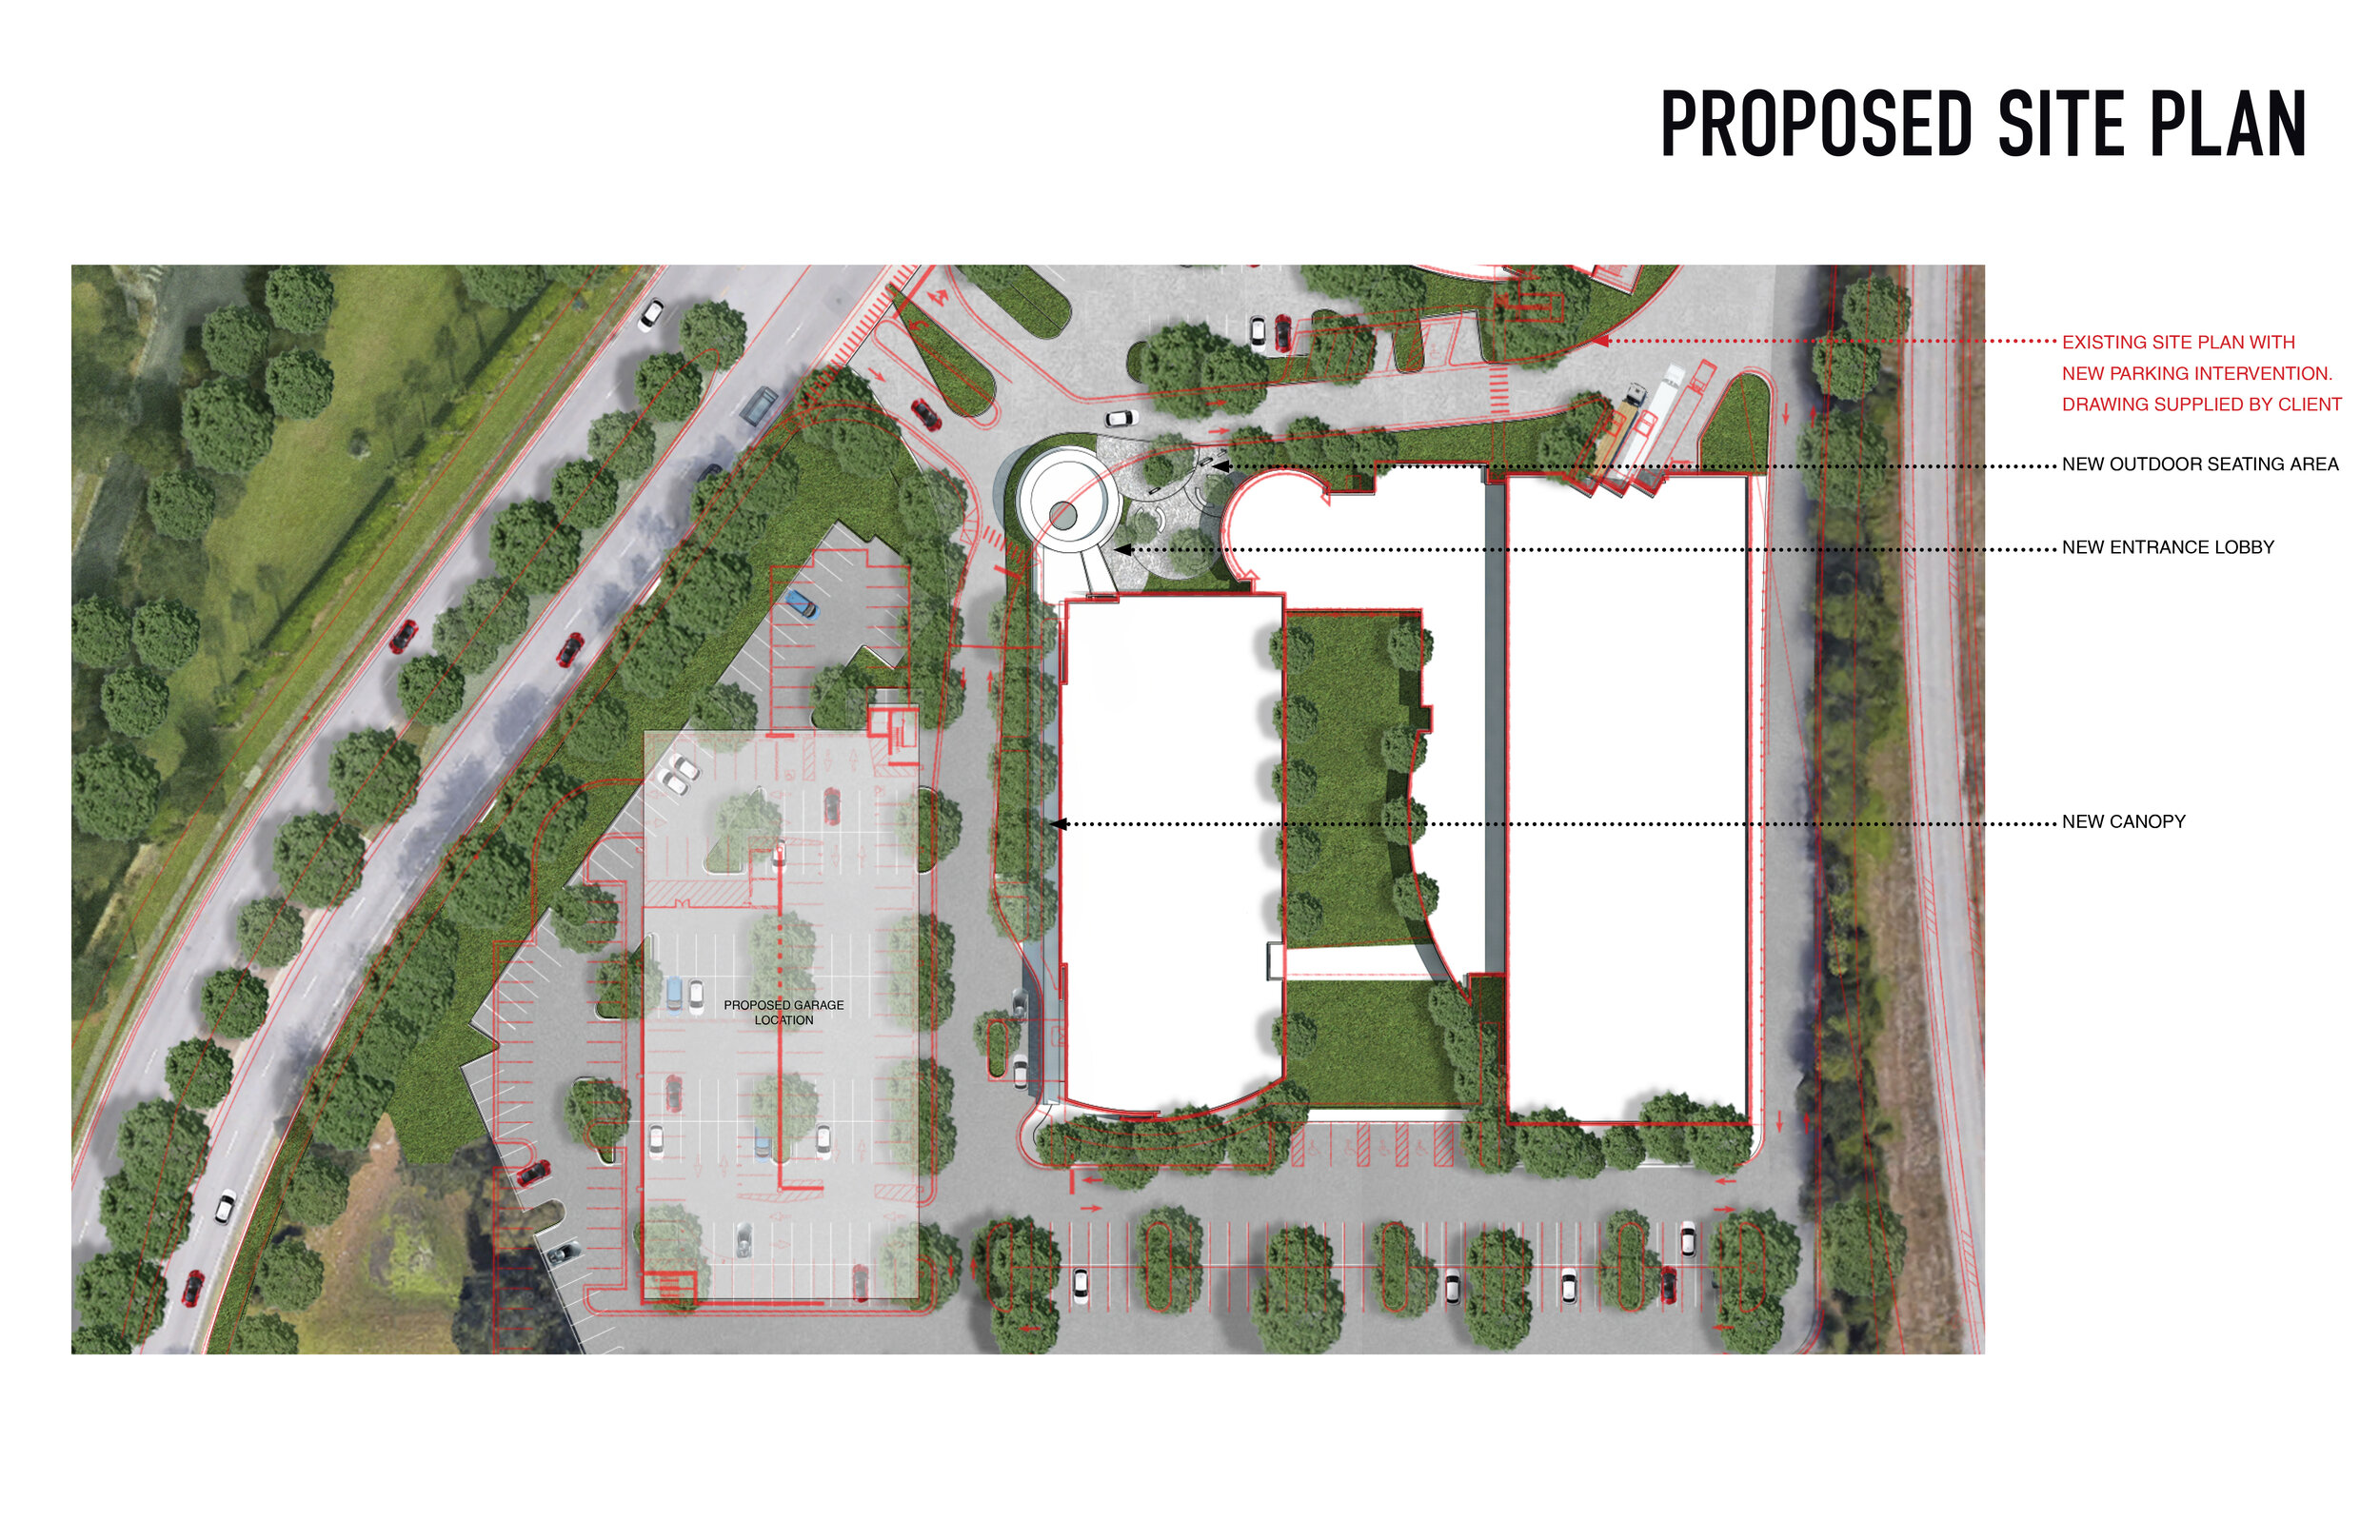 2019 0928 Site plan_with existing overlay.jpg